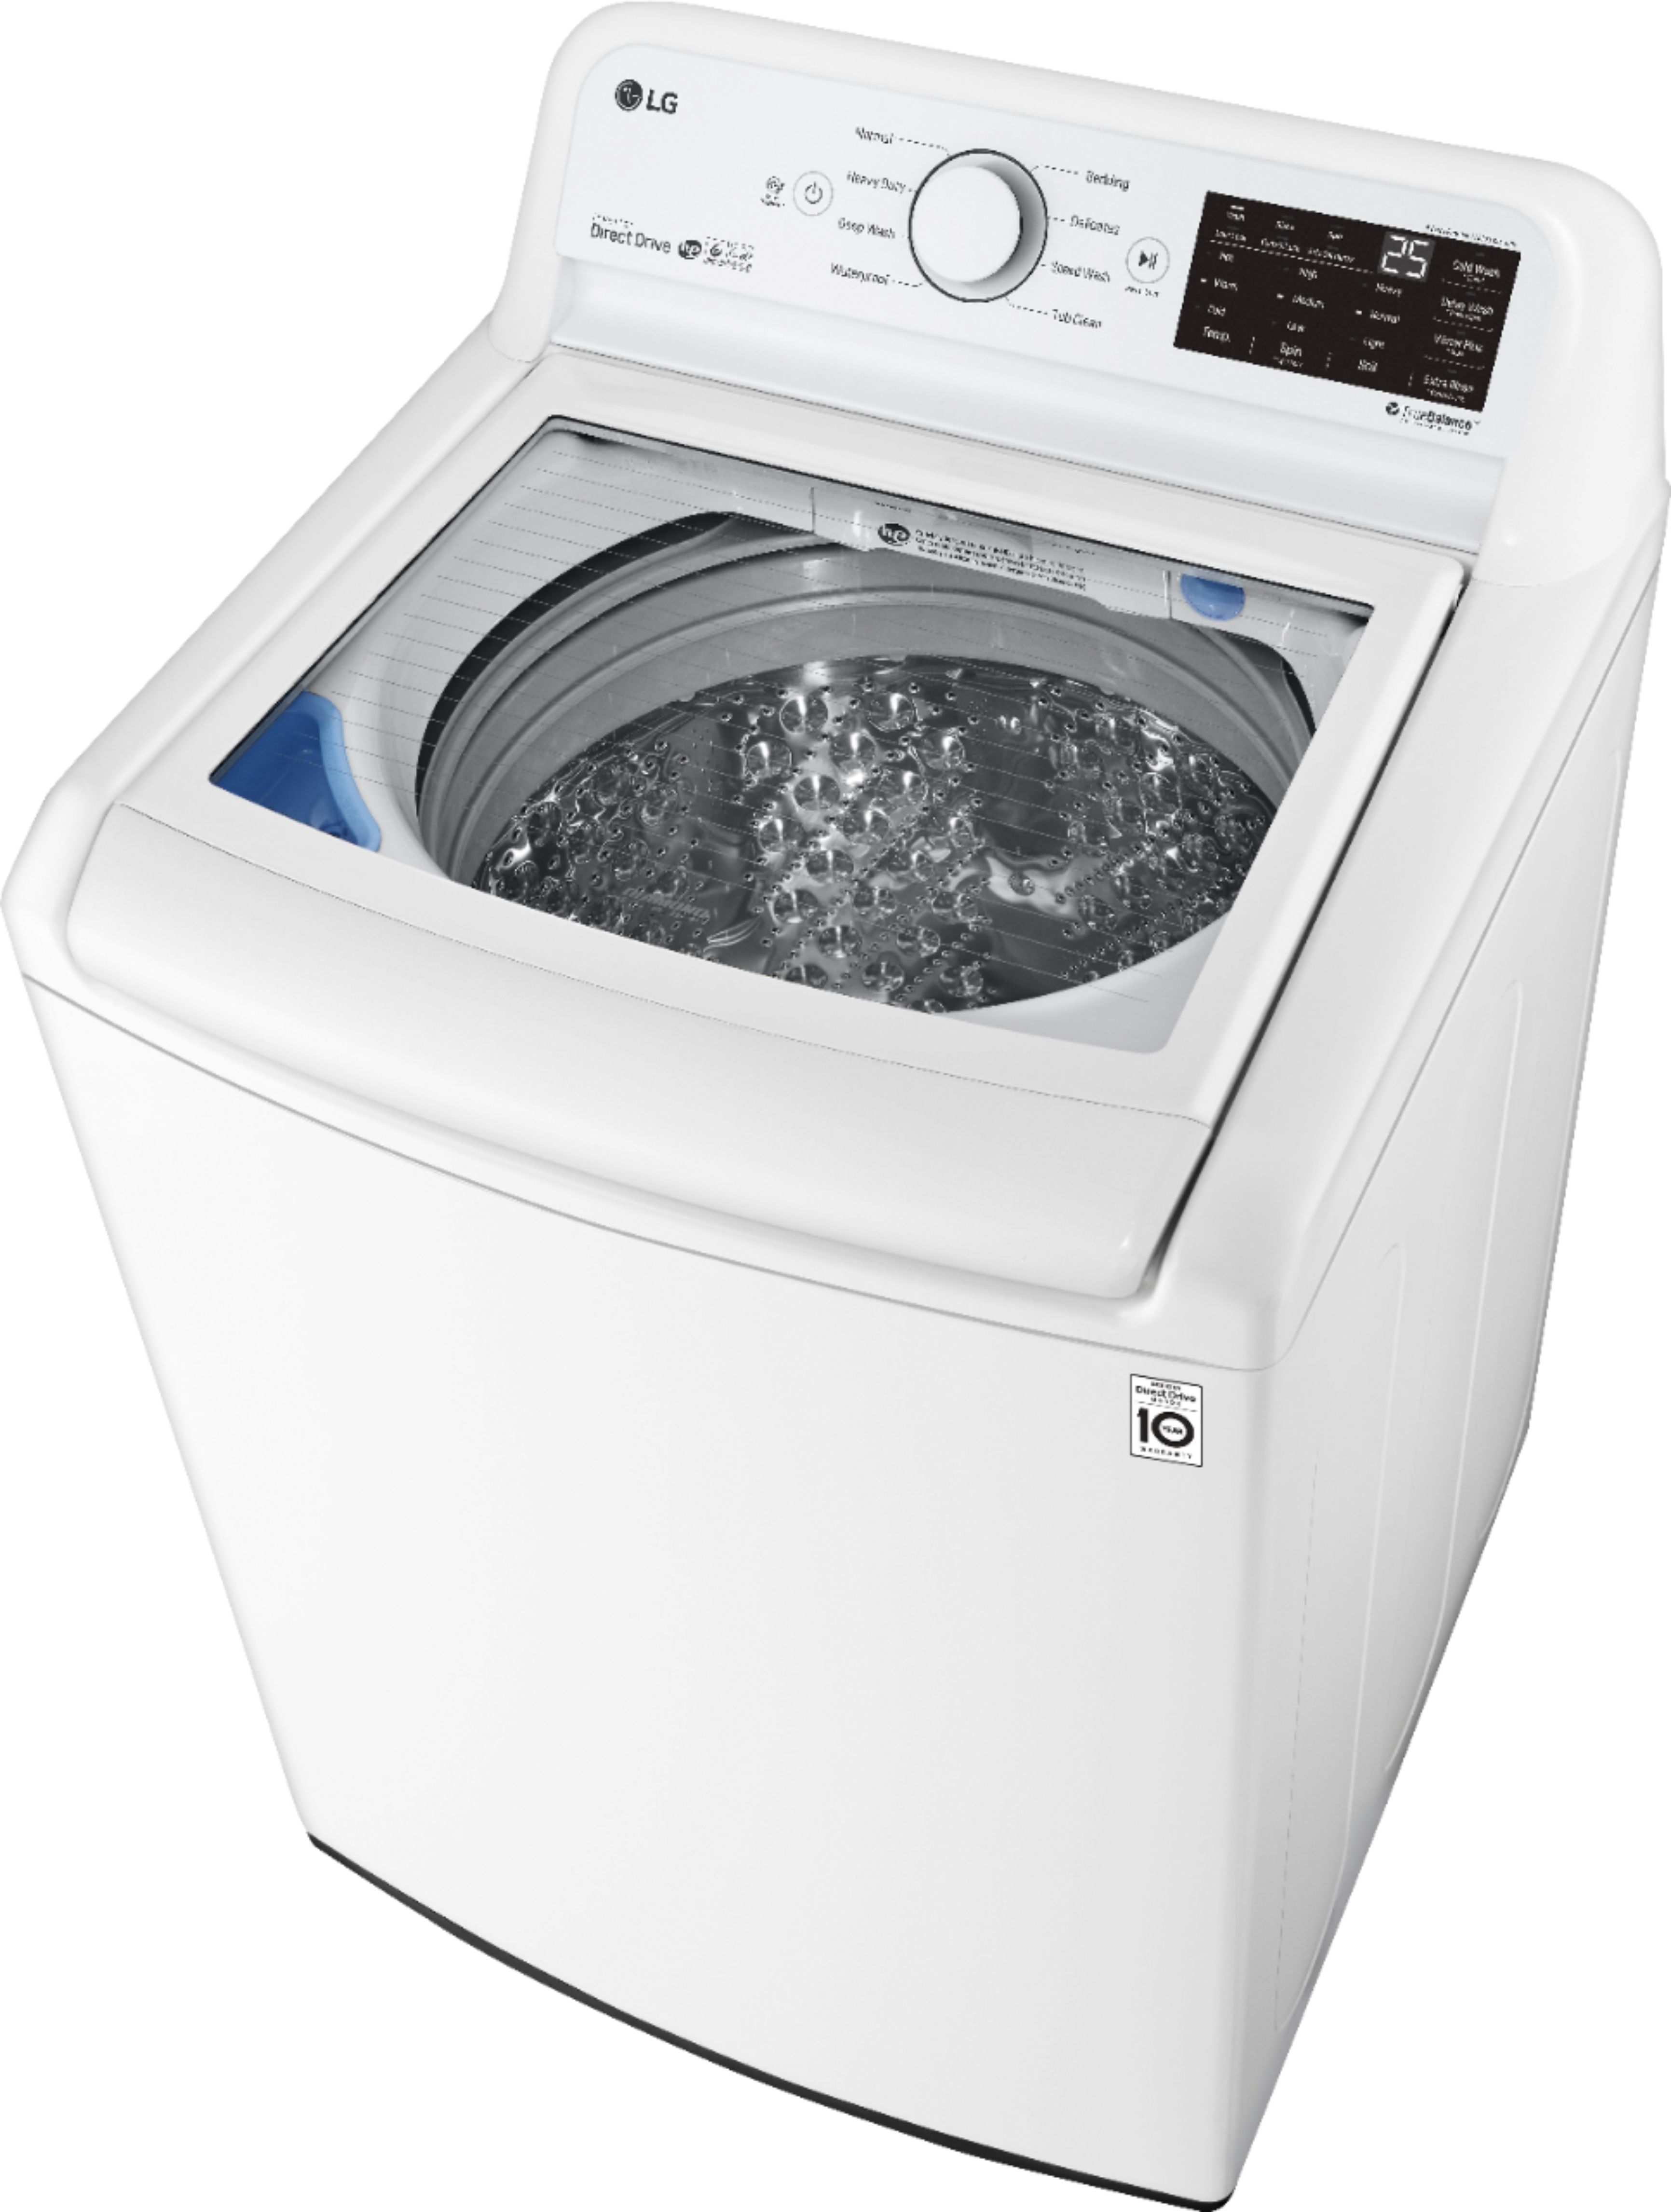 Questions and Answers: LG 4.5 Cu. Ft. High-Efficiency Top Load Washer ...